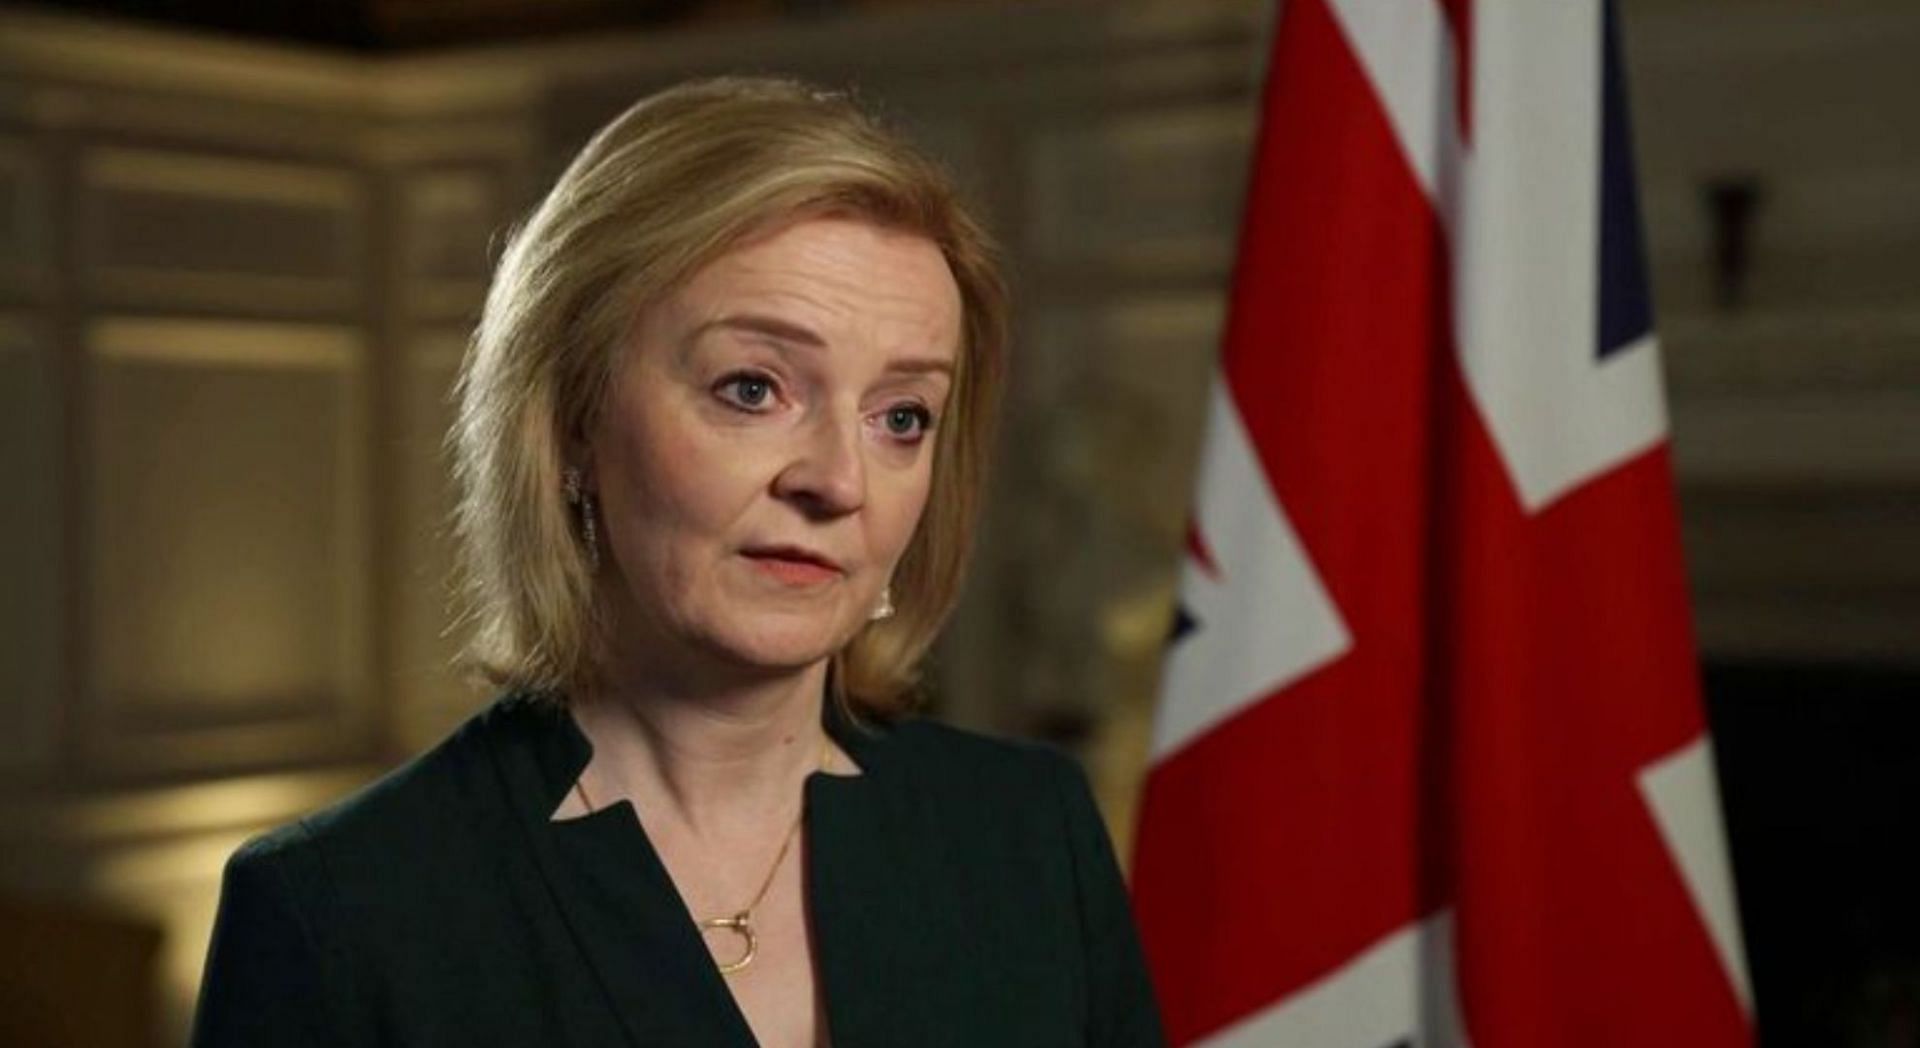 Liz Truss has served as the UK&#039;s Secretary of State for Foreign, Commonwealth and Development since 2019 (Image via Effie Deans/Twitter)